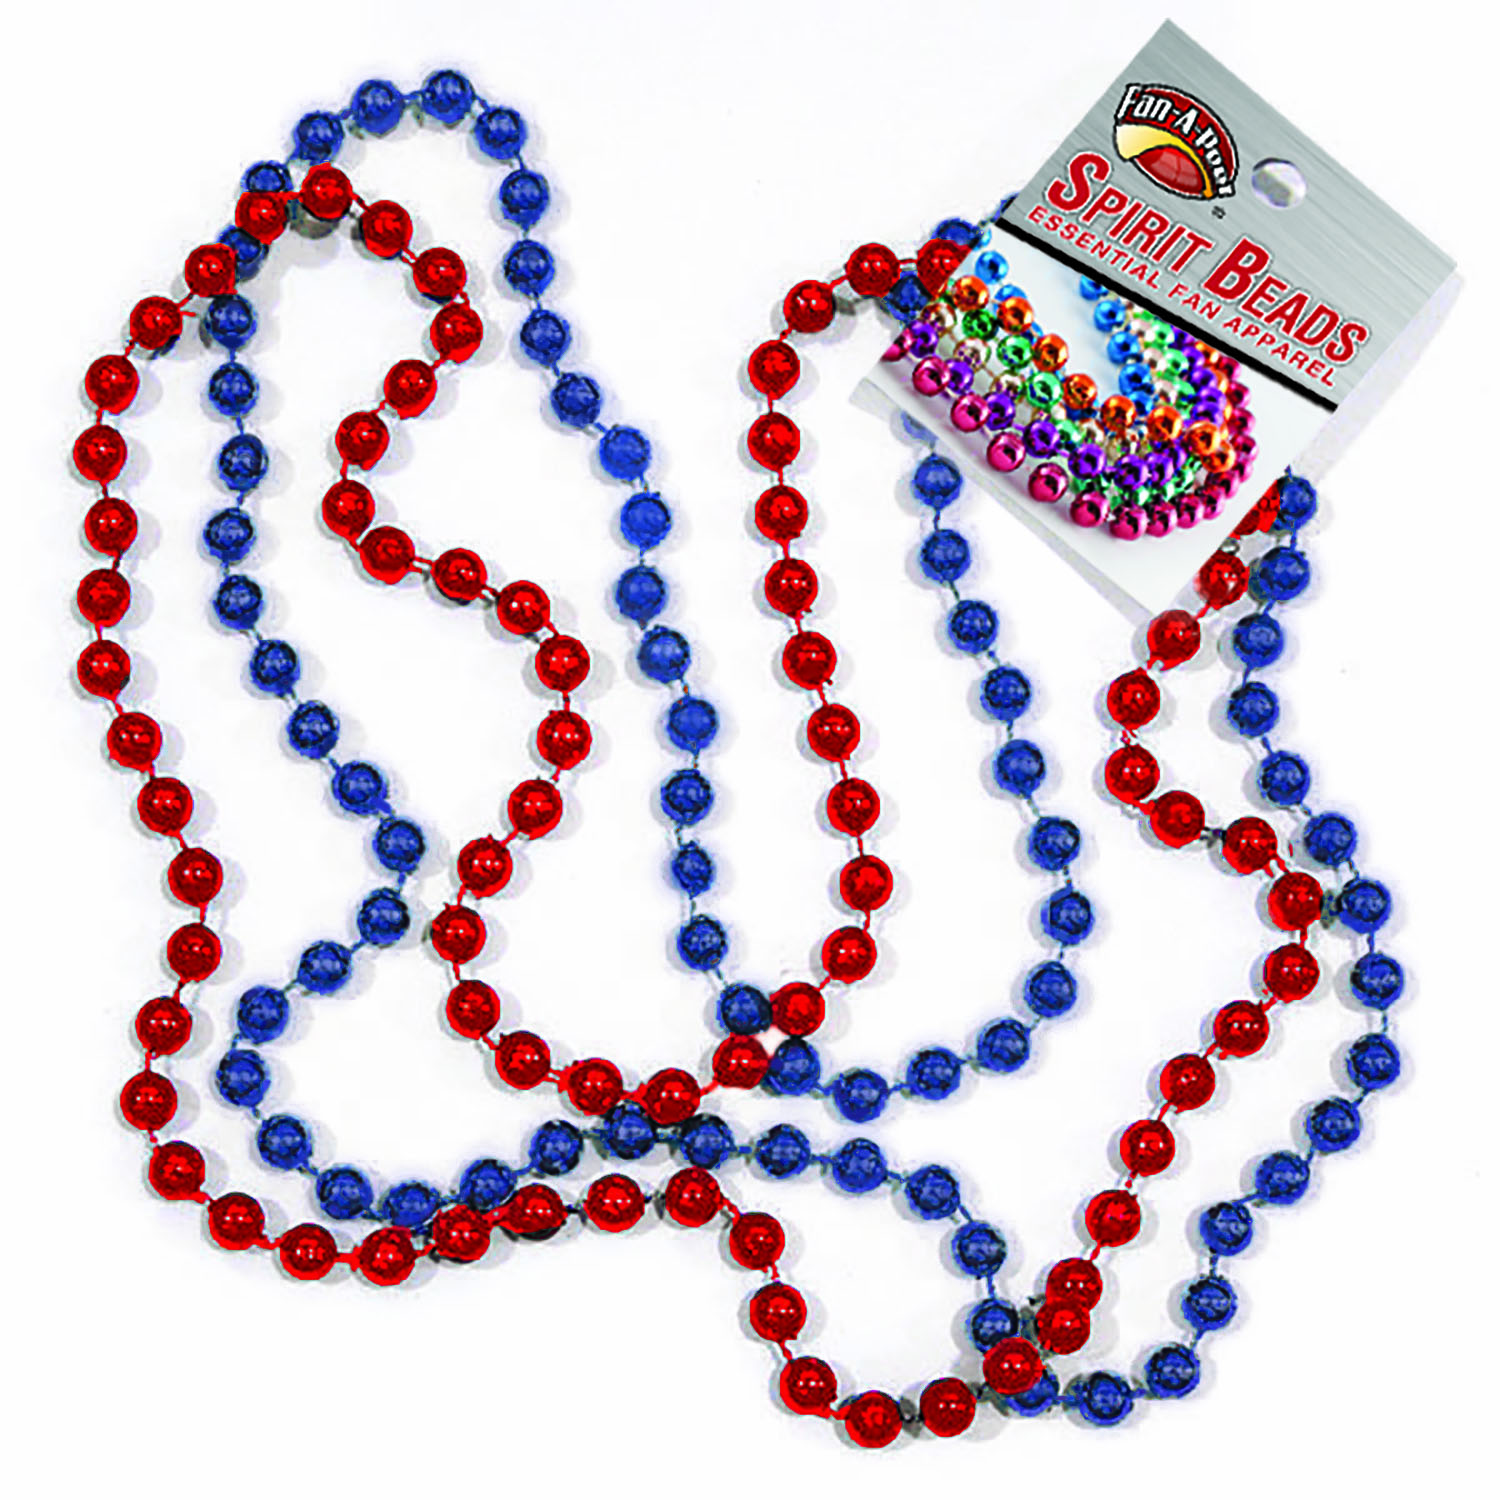 Spirit Beads By Fan-A-Peel - Navy Blue & Red Bead Necklaces 2 Pack